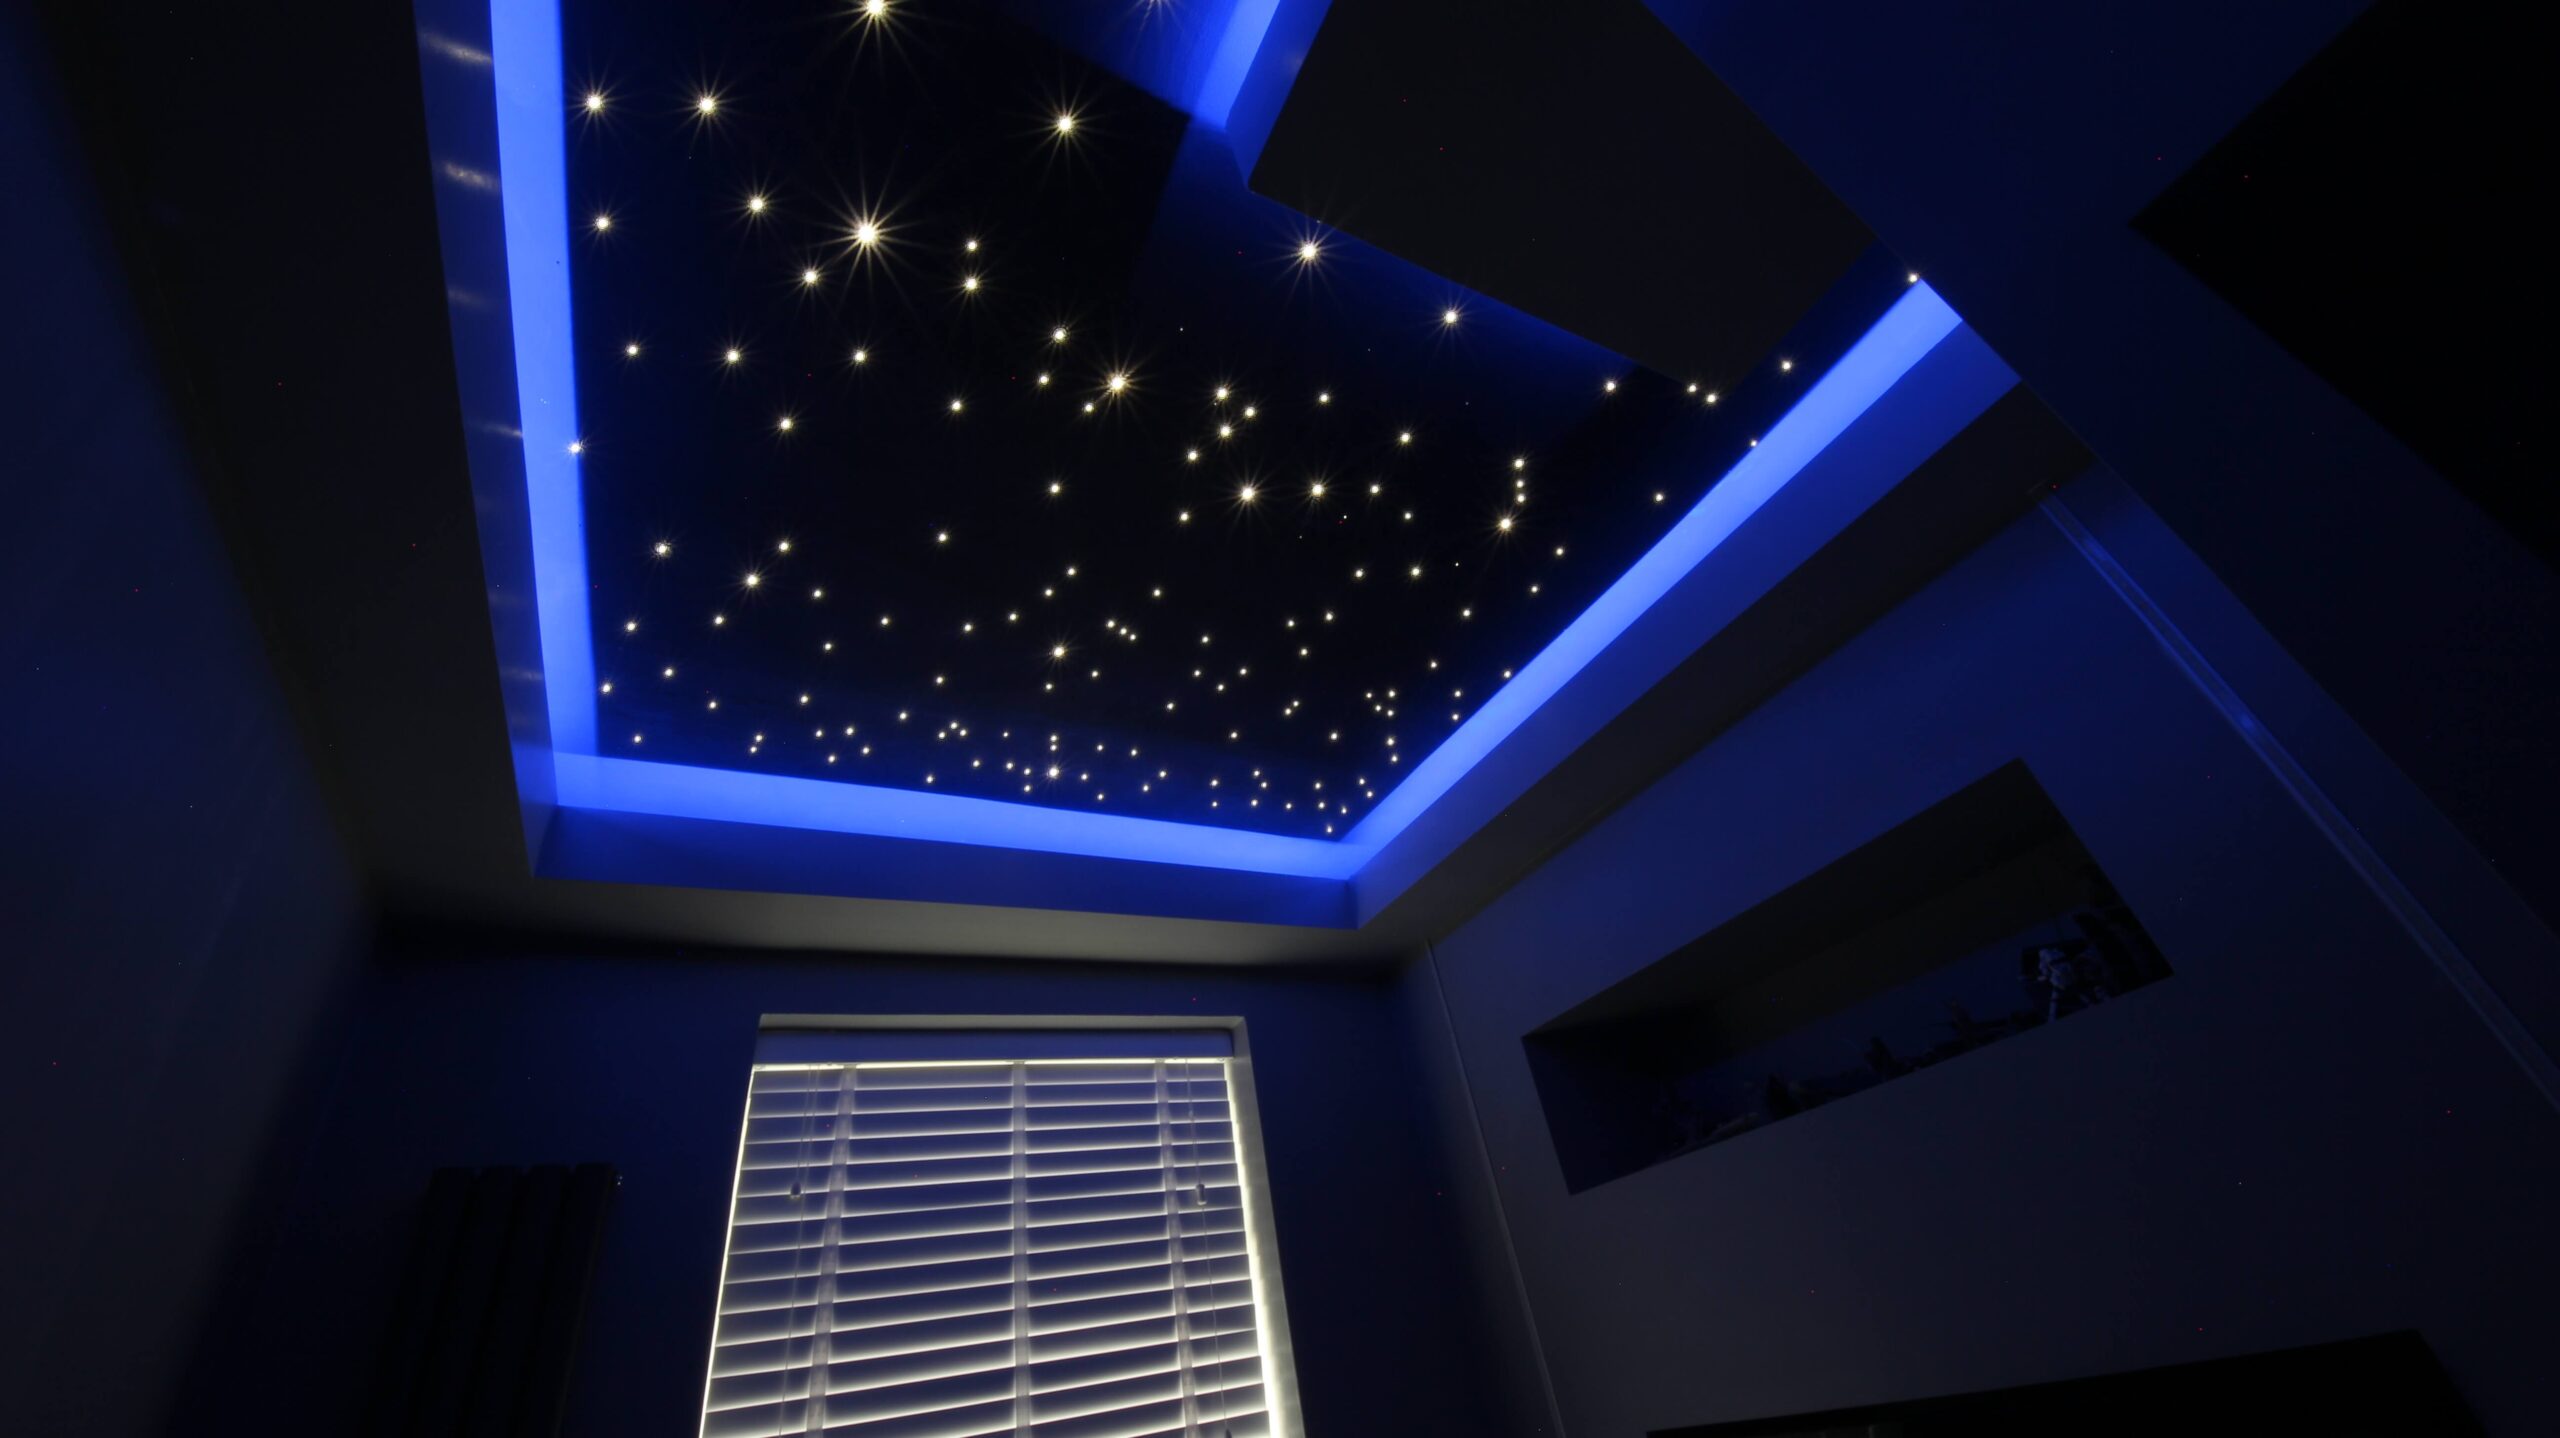 starry ceiling